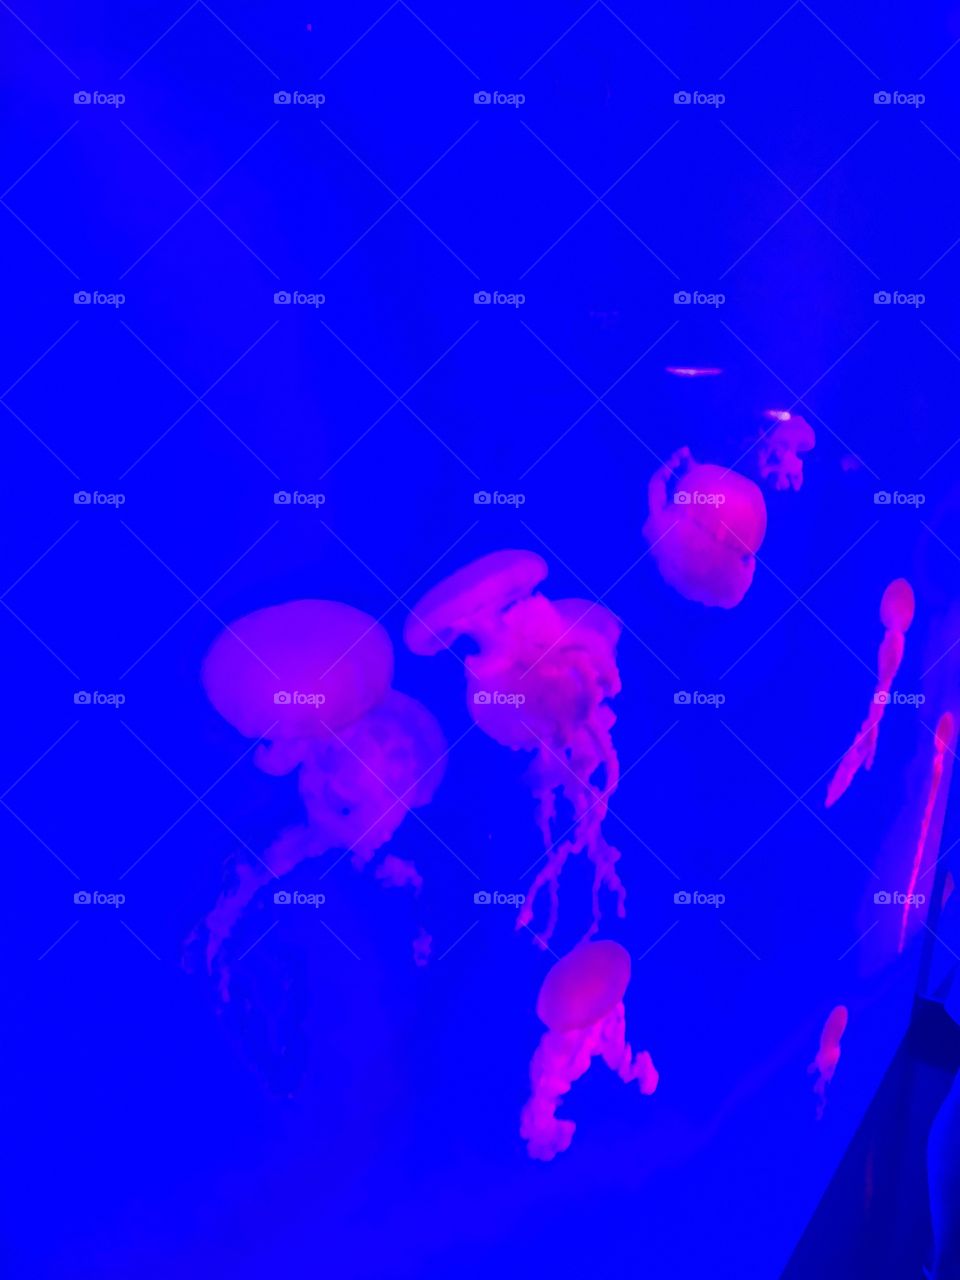 More jelly fish